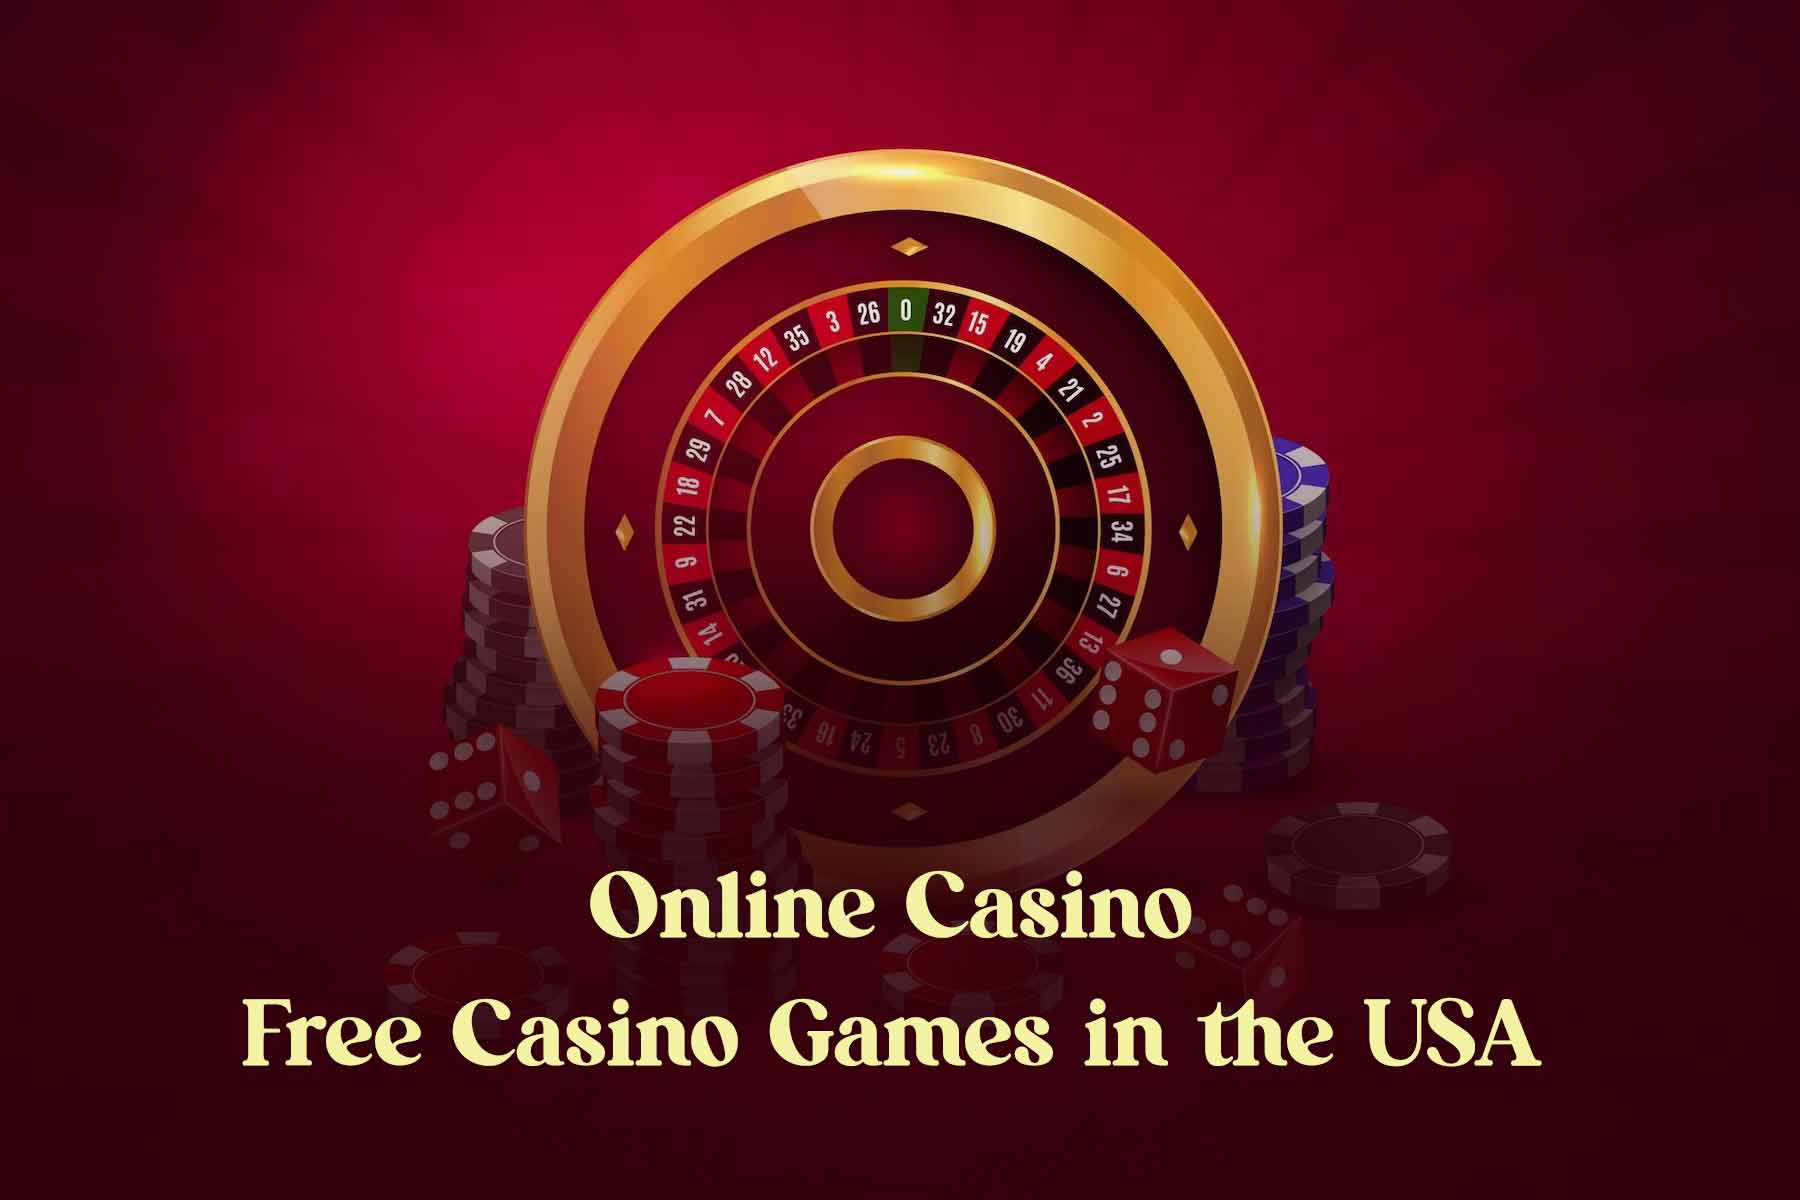 Online Casino Platforms Offering Free Casino Games in the USA